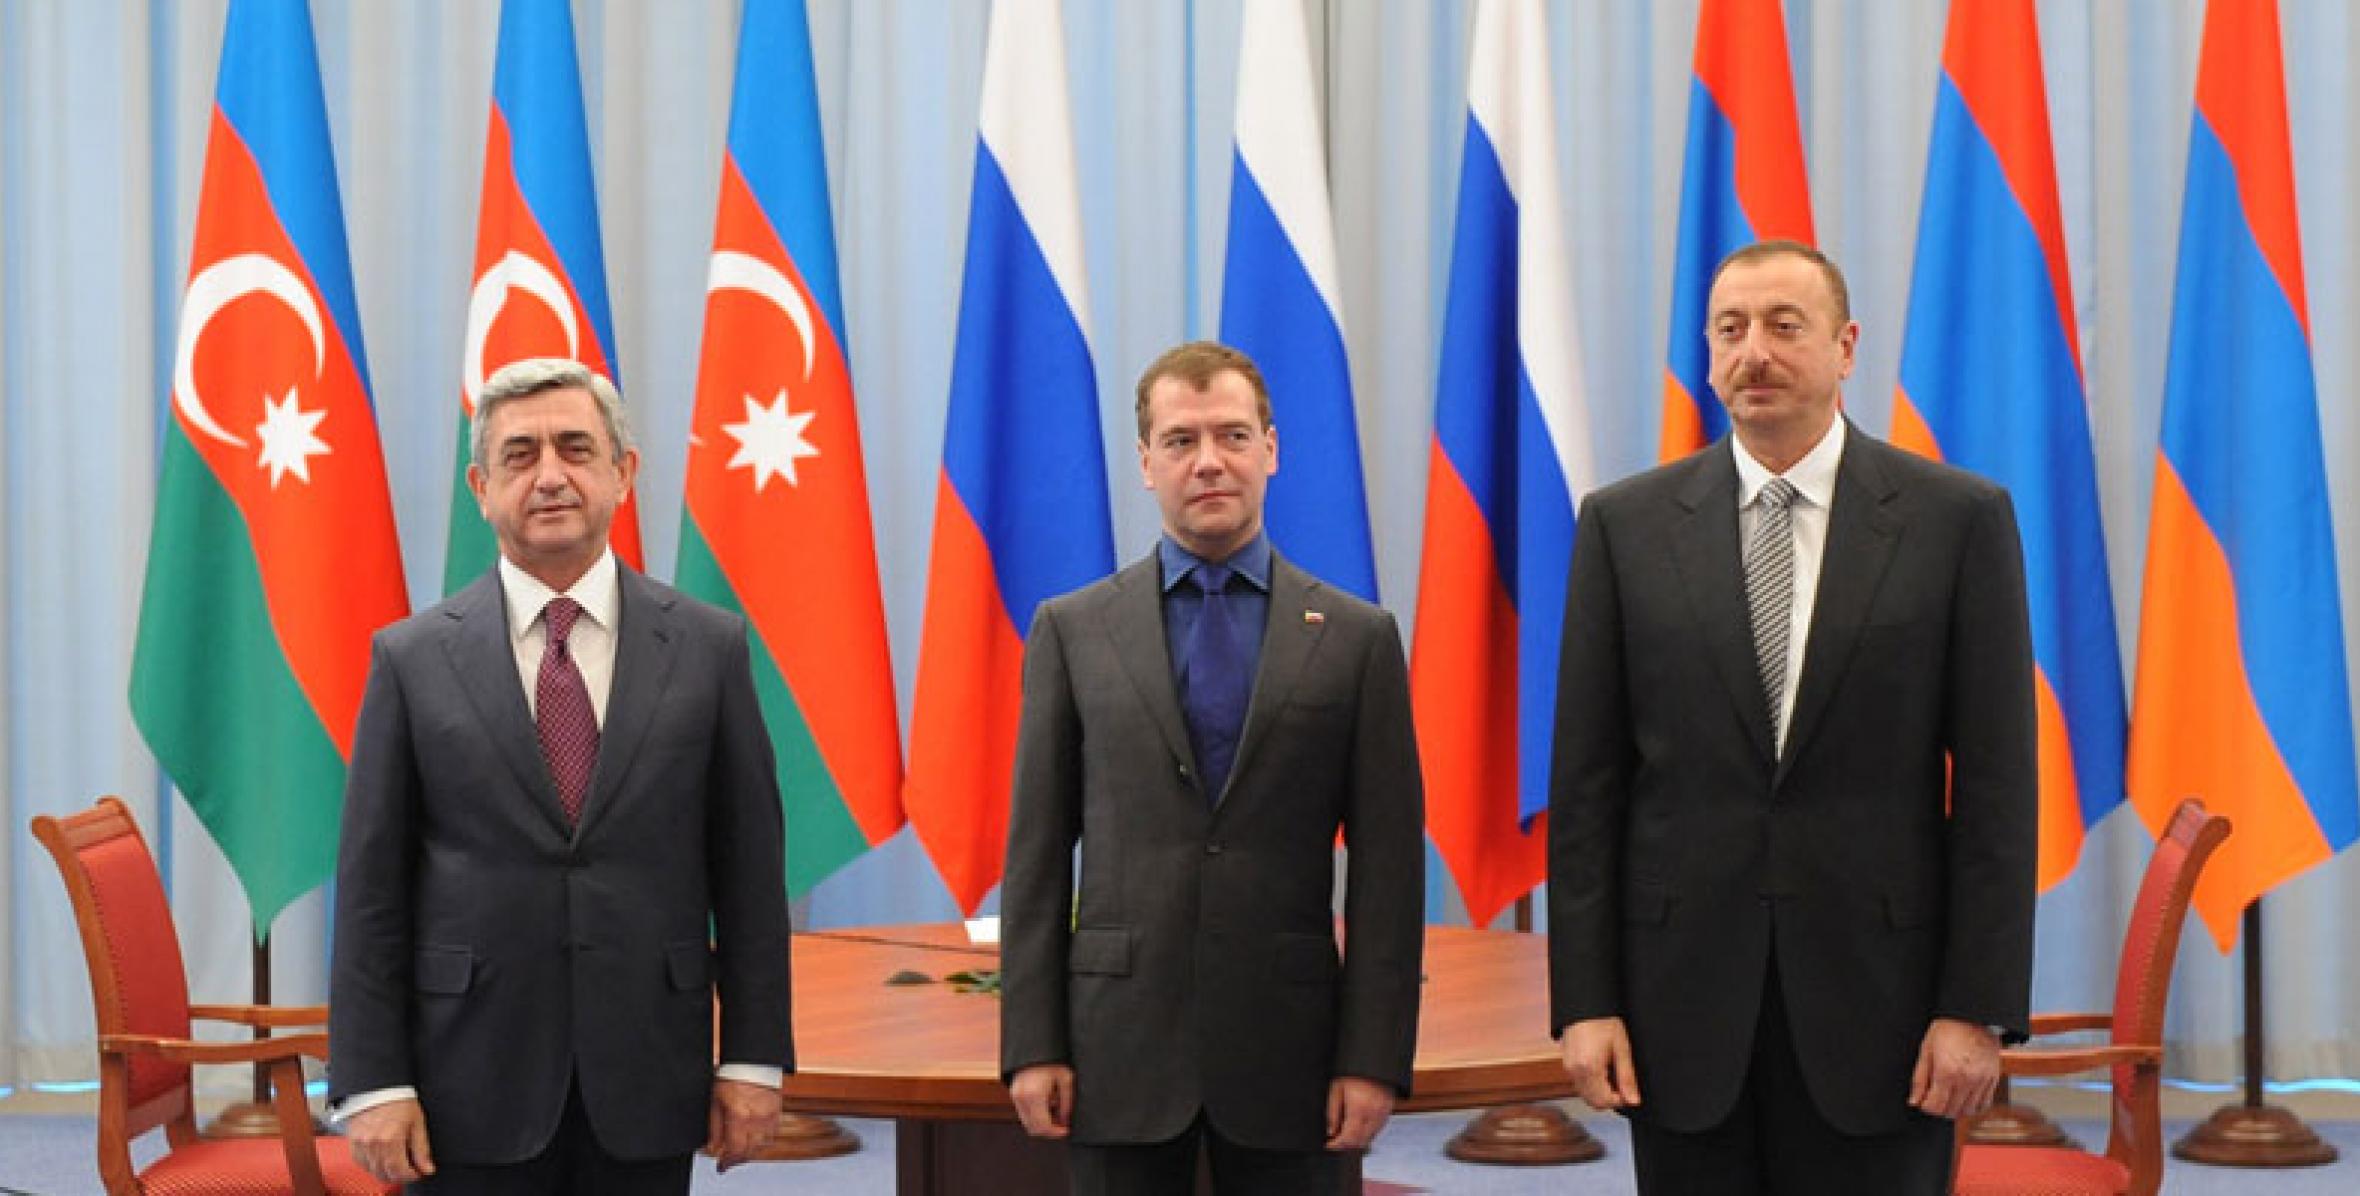 The meeting between the Presidents of Azerbaijan, Russia and Armenia held in Astrakhan